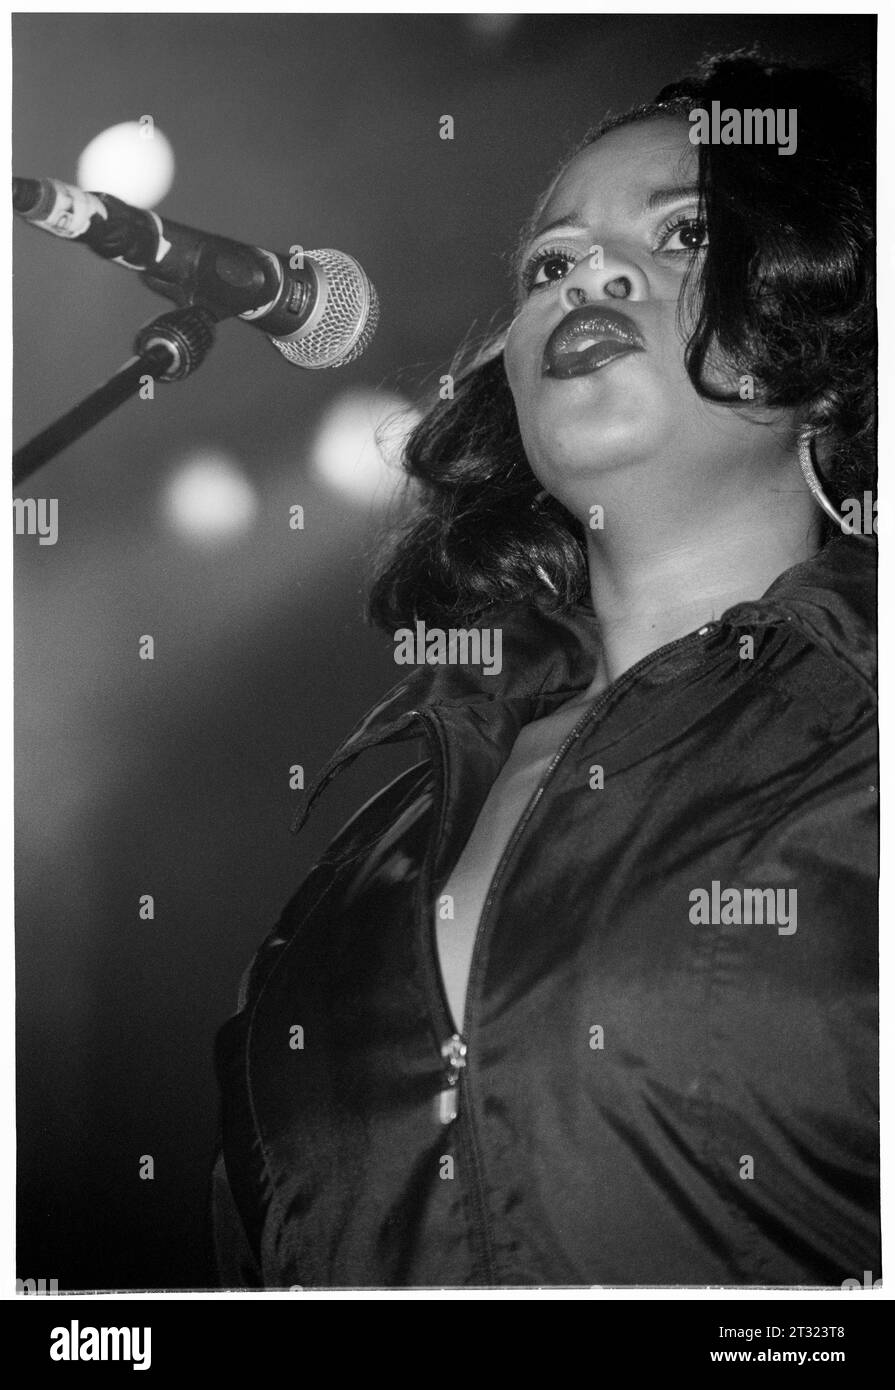 MAYSA, INCOGNITO, 1996: American jazz singer Maysa Leak singing with the British soul group Incognito on their UK Tour at Cardiff University Students Union Great Hall in Cardiff, Wales in October 1996. Photograph: Rob Watkins.  INFO: Incognito, a British acid jazz band formed in London in 1979, revolutionized the genre with their fusion of jazz, funk, soul, and dance music. Stock Photo